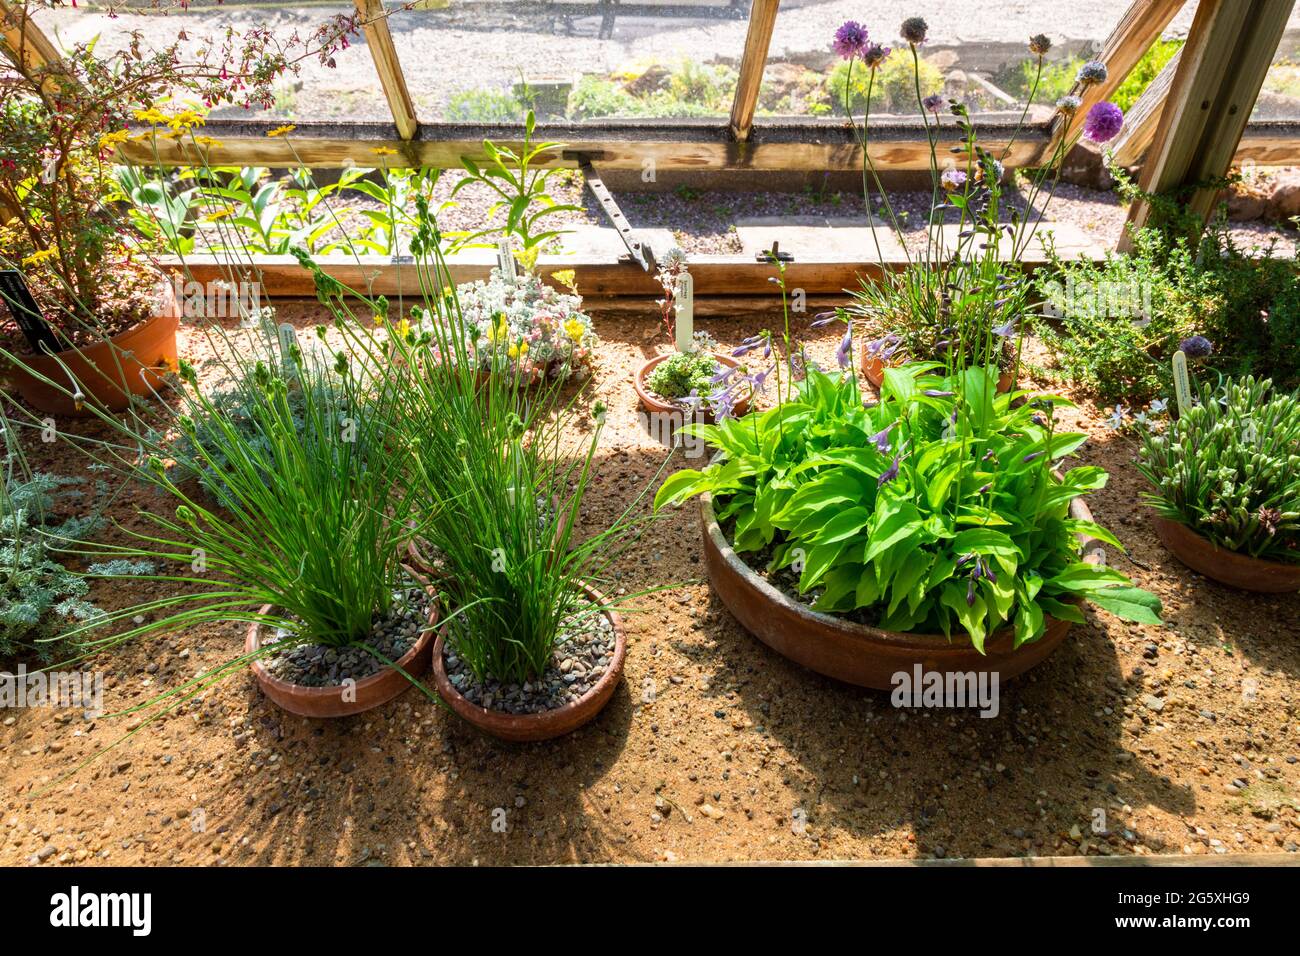 Plants needing hot temperatures in a greenhouse, UK Stock Photo